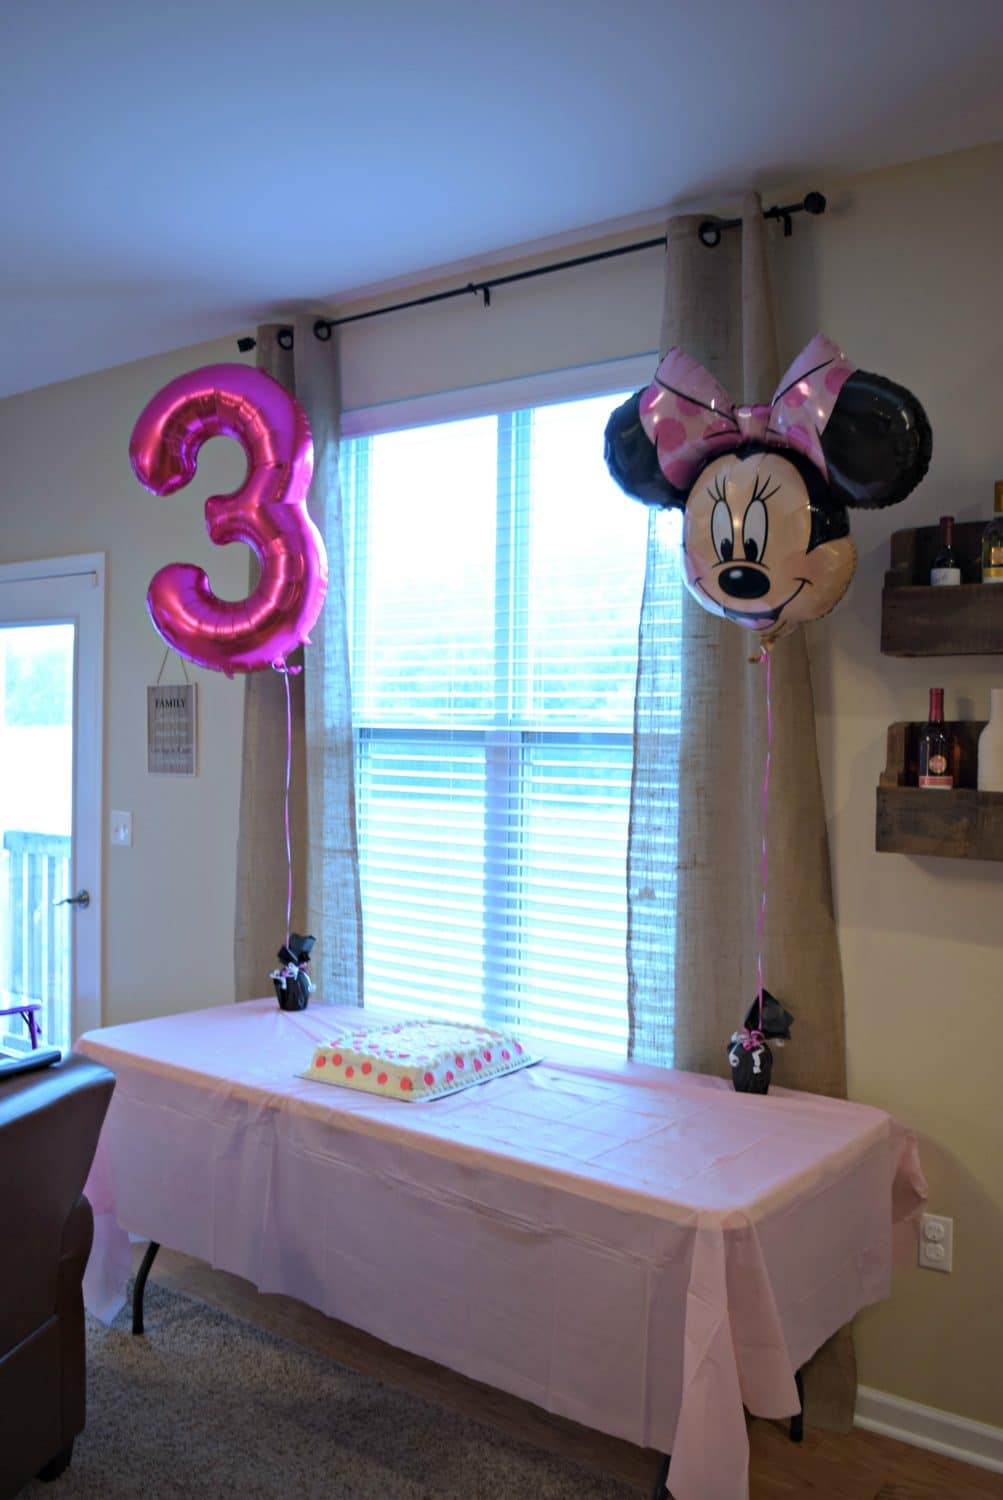 Minnie Mouse balloons and a dun pink polka dot cake are perfect for our Minnie Mouse Birthday Party 